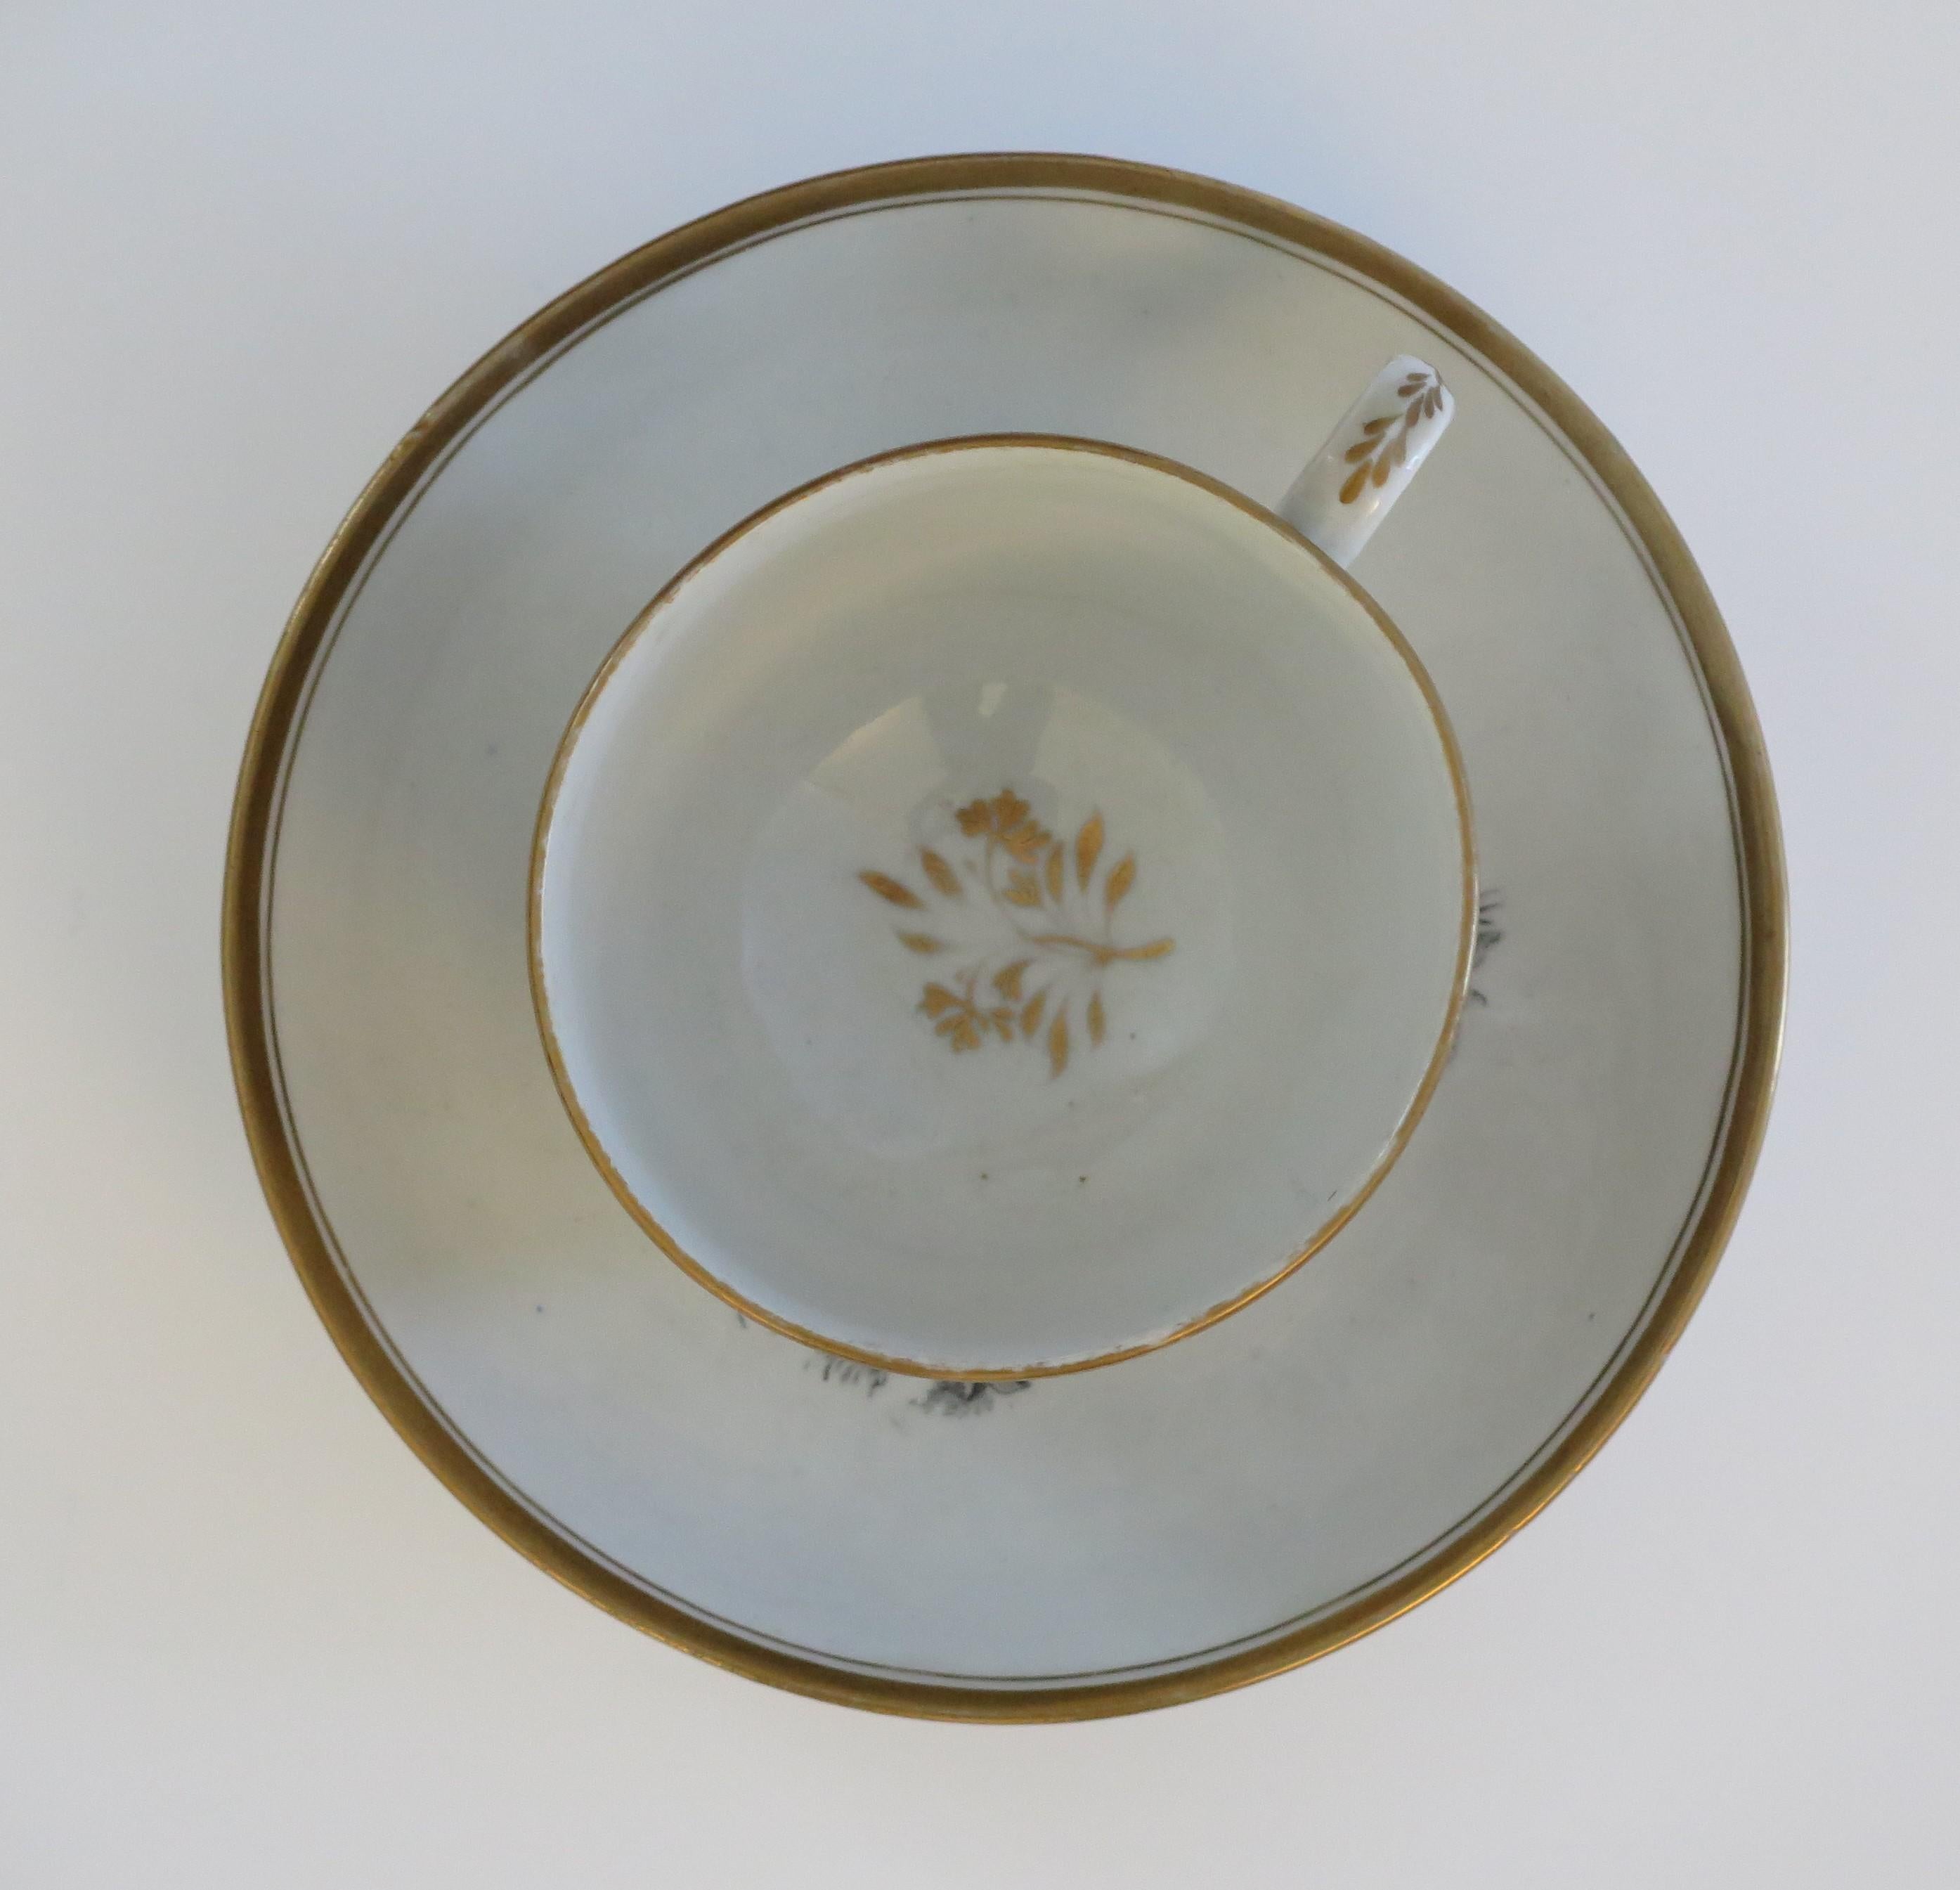 This is a bat printed porcelain Tea cup and saucer, by New Hall, dating to the early 19th century George 111rd period, circa 1805.

Both pieces are well potted, the cup on a low foot with a ring handle.

Both pieces have a bat printed design;